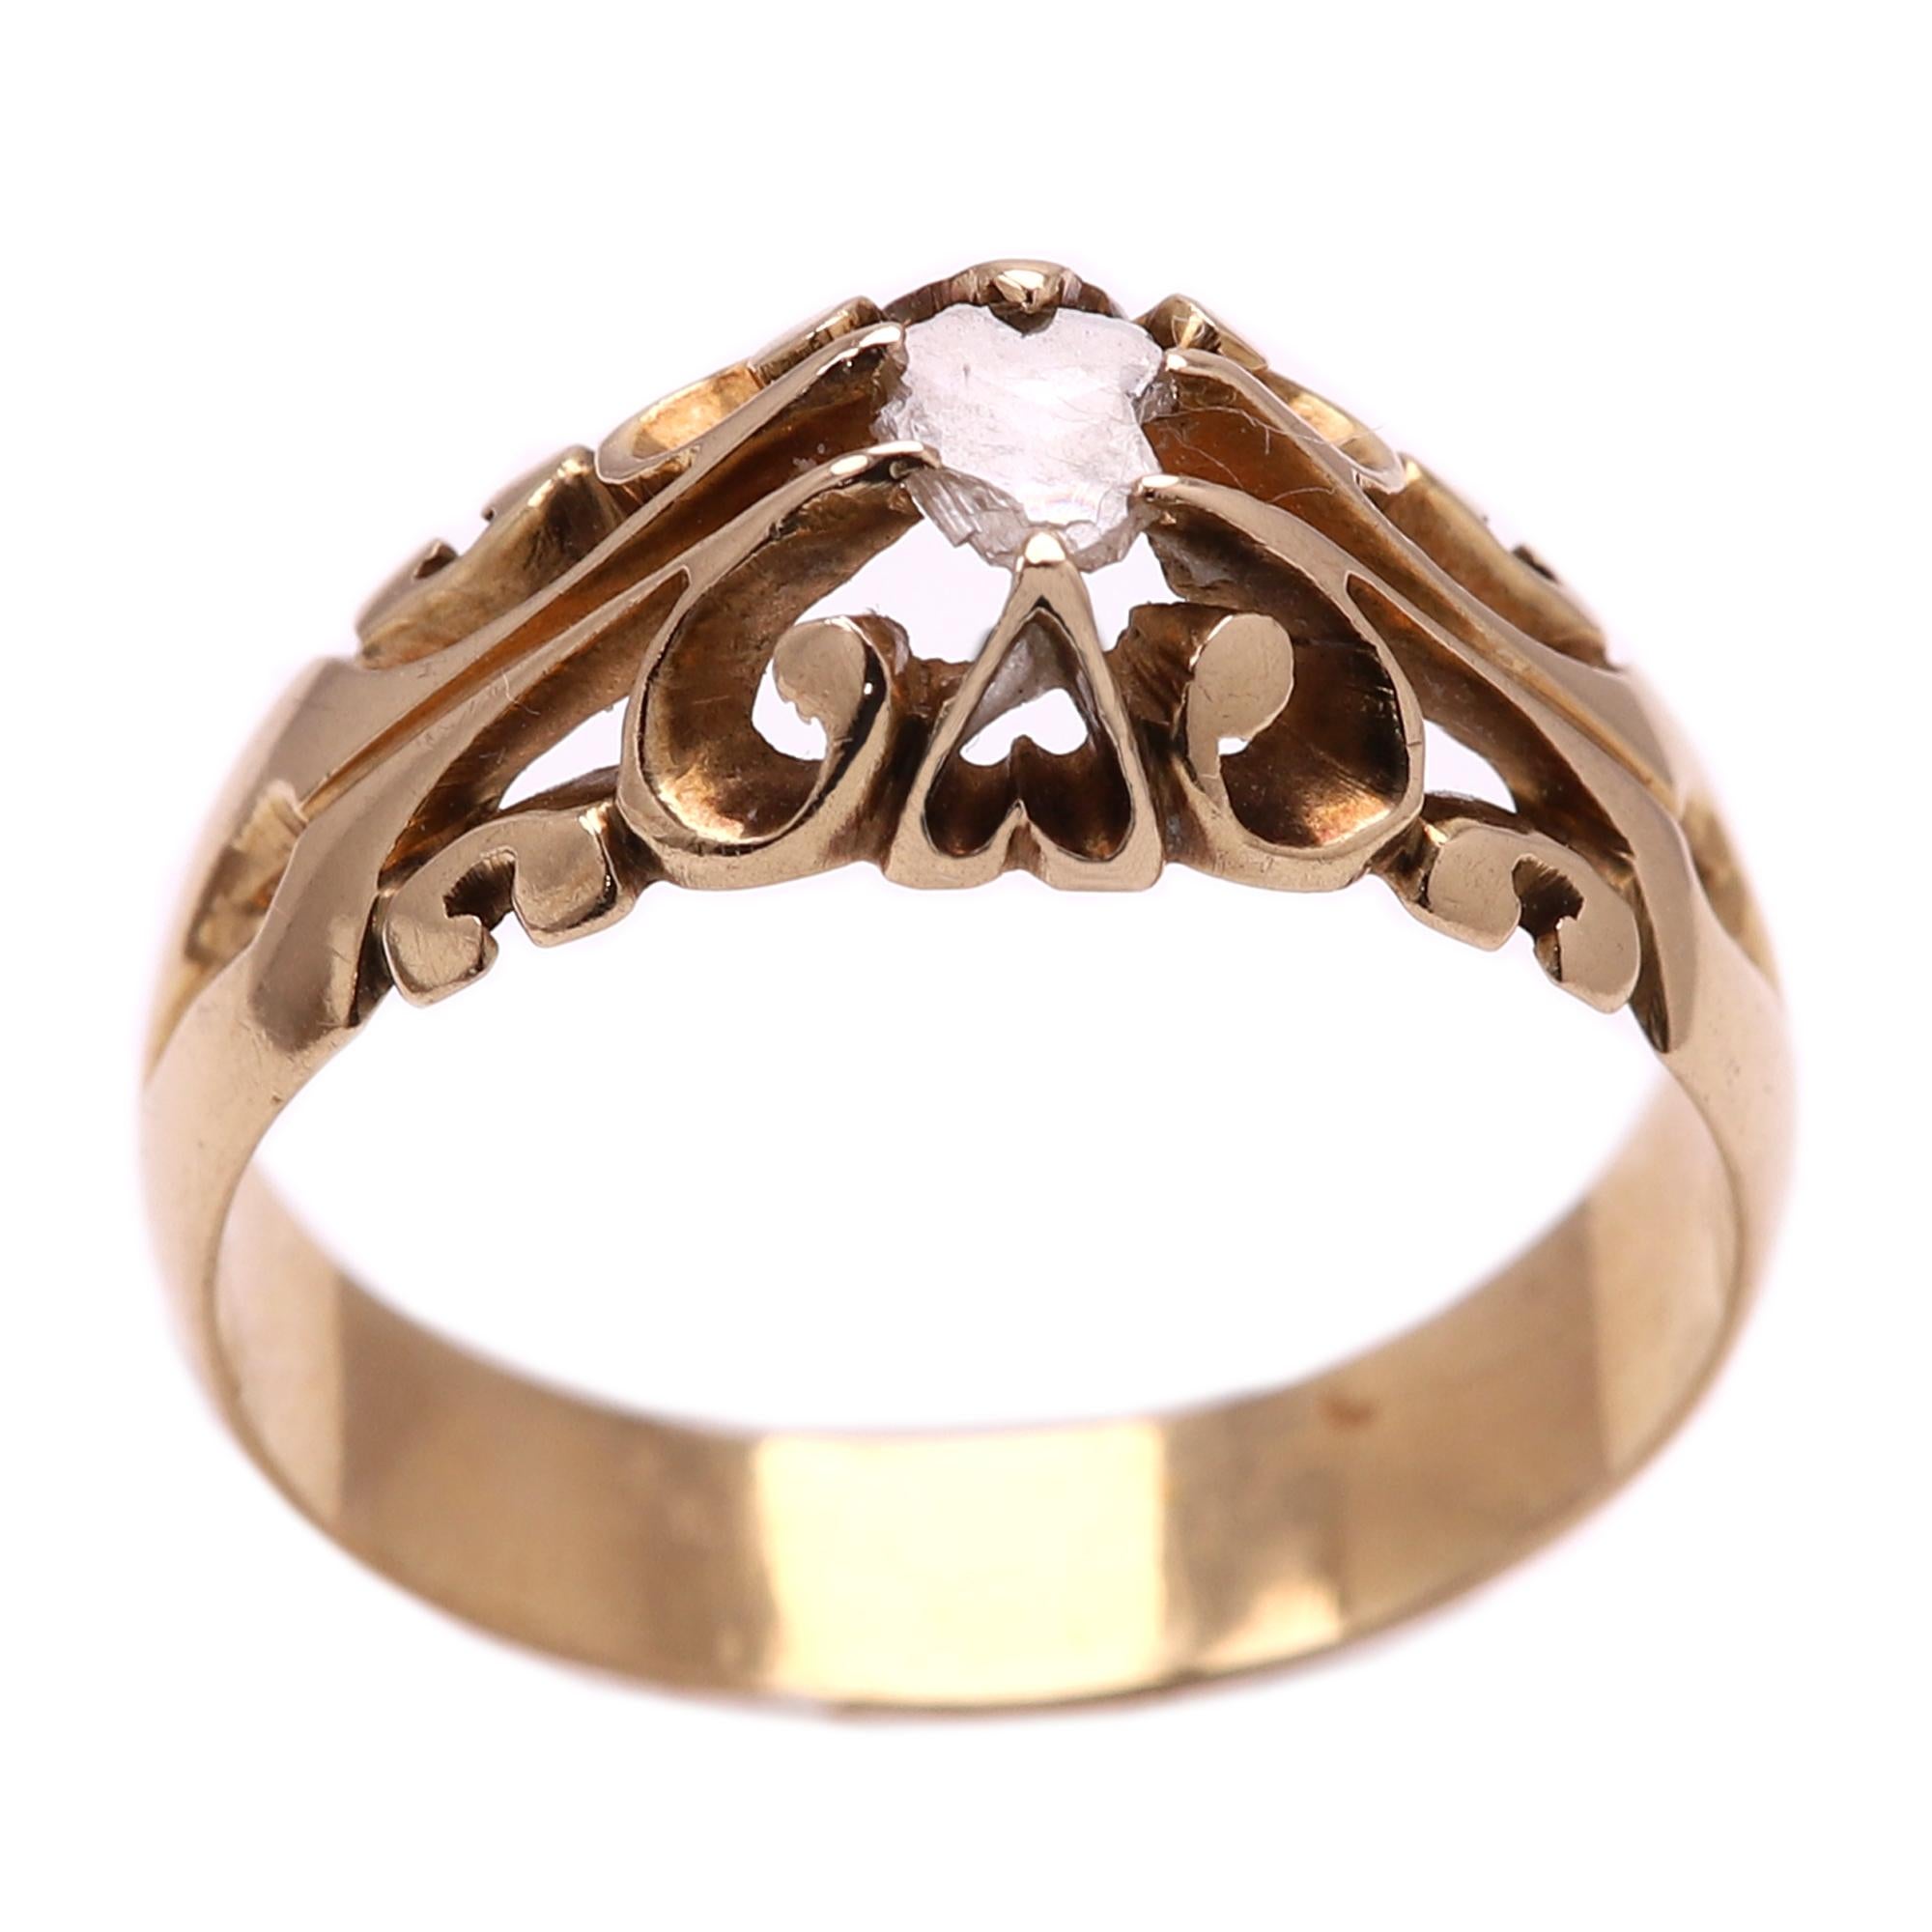 Antique Art Nouveau Ring 18 Karat Yellow Gold with a Sliced Diamonds For Sale 3